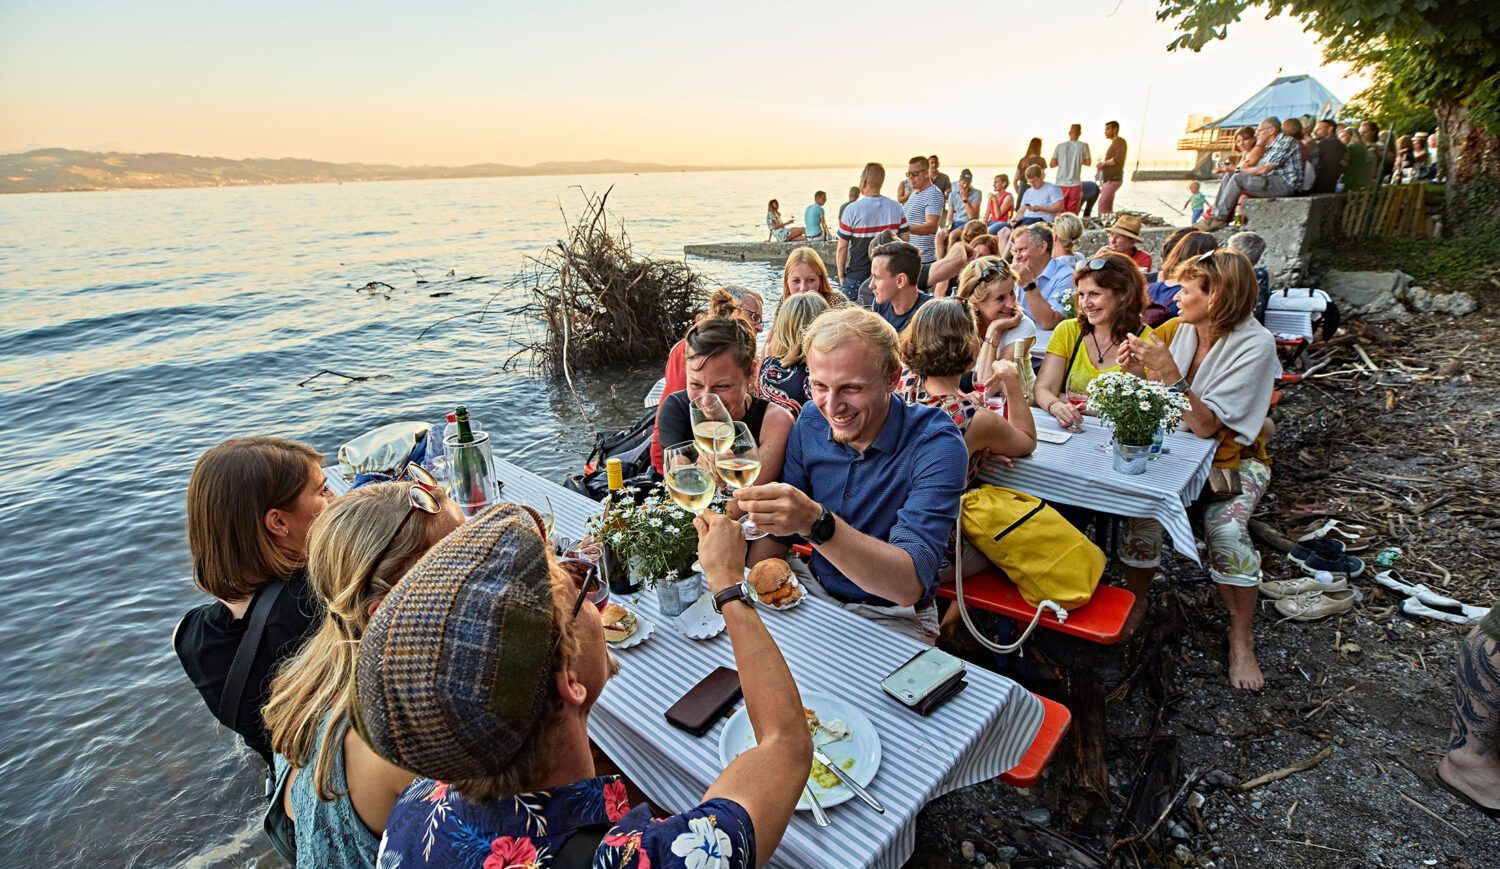 Wine festival 'Komm und See' takes place against the beautiful backdrop of Lake Constance